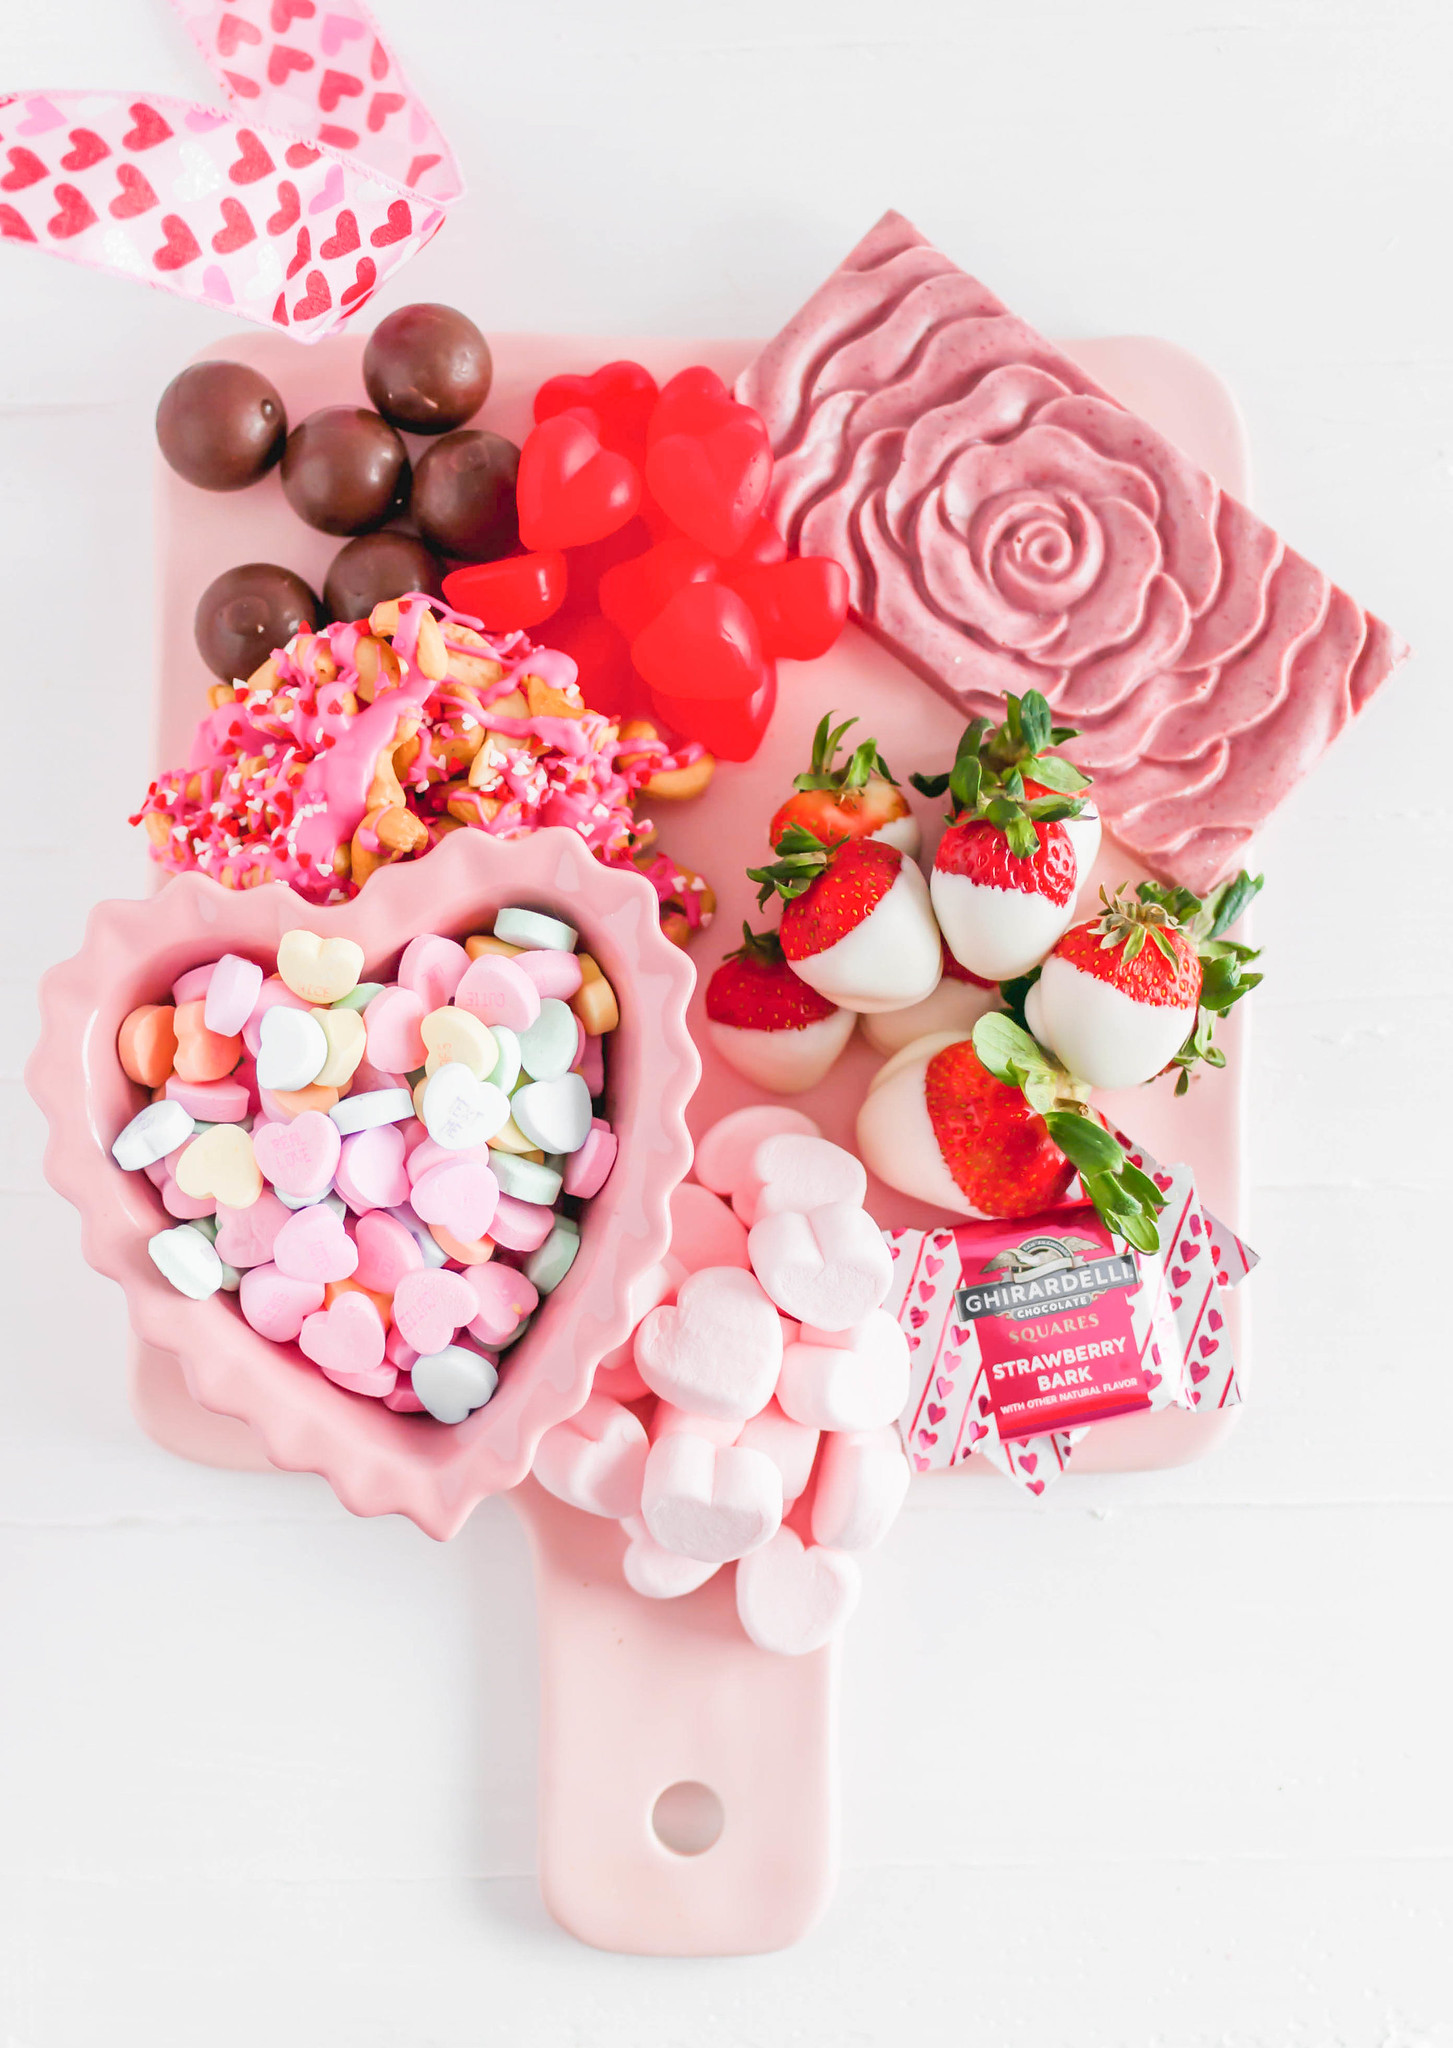 This Valentine's Dessert Board is simple and delicious to put together. A few simple homemade treats filled in with adorable store-bought options.